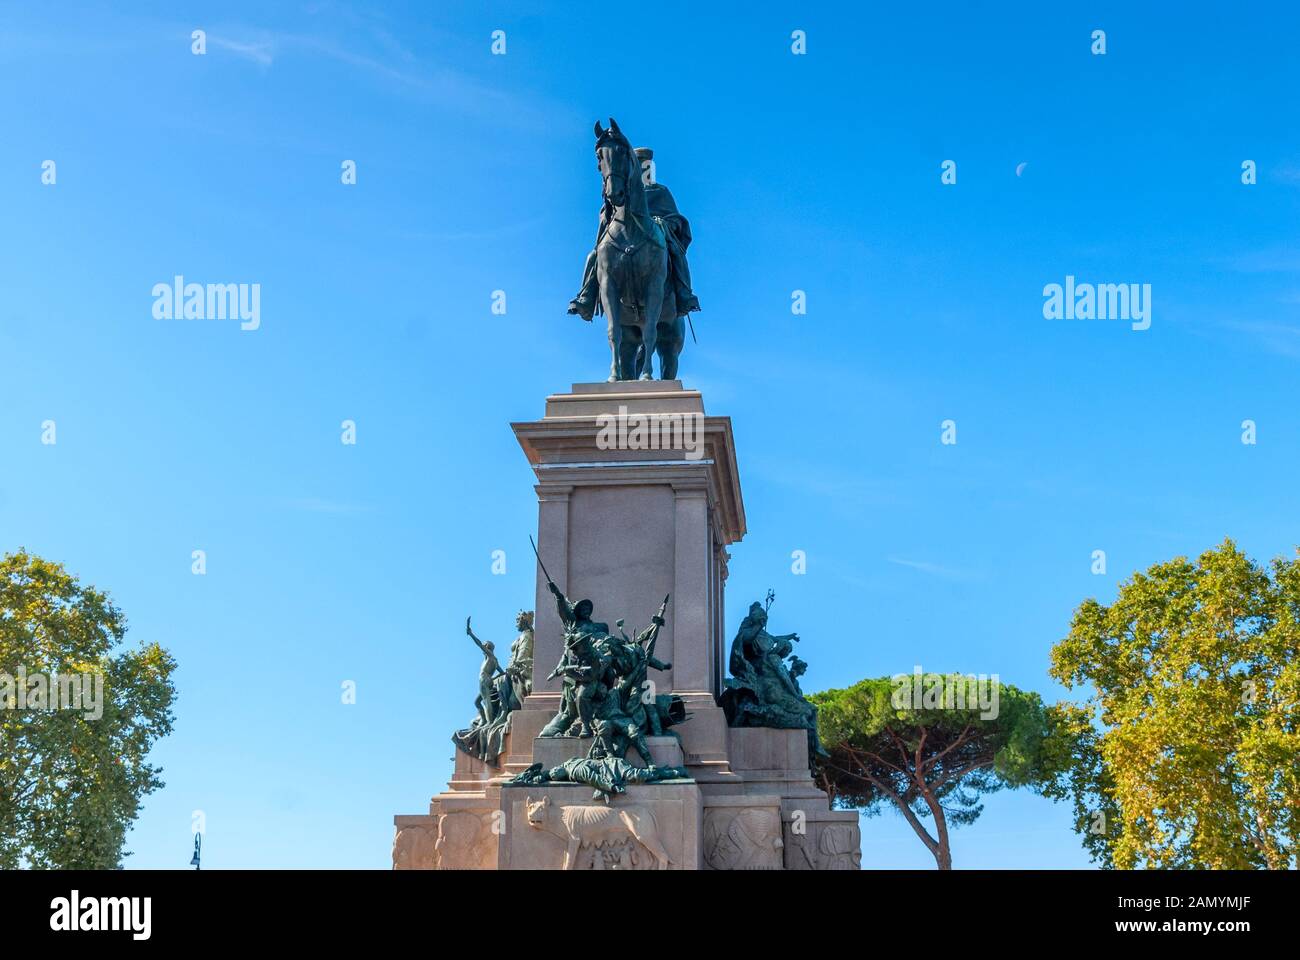 equestrian monument of Giuseppe Garibaldi, placed in Rome on the highest point of the Janiculum hill on the square Piazzale Garibaldi, Rome, Italy Stock Photo